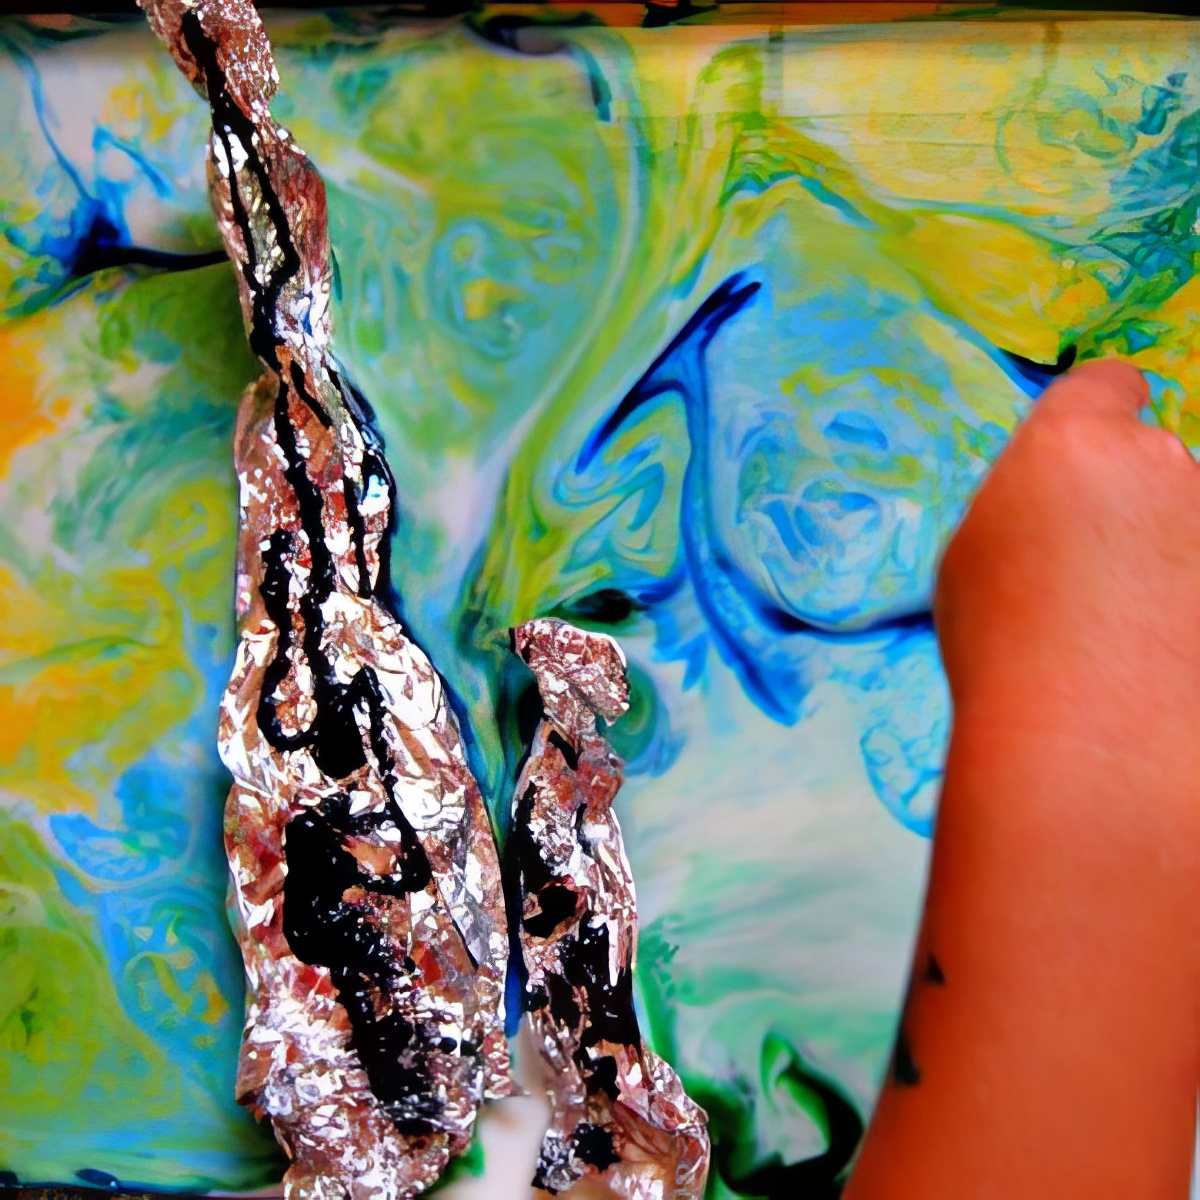 starrynightmilkpainting, fun art activities for 2-year-olds, toddler fun arts and crafts